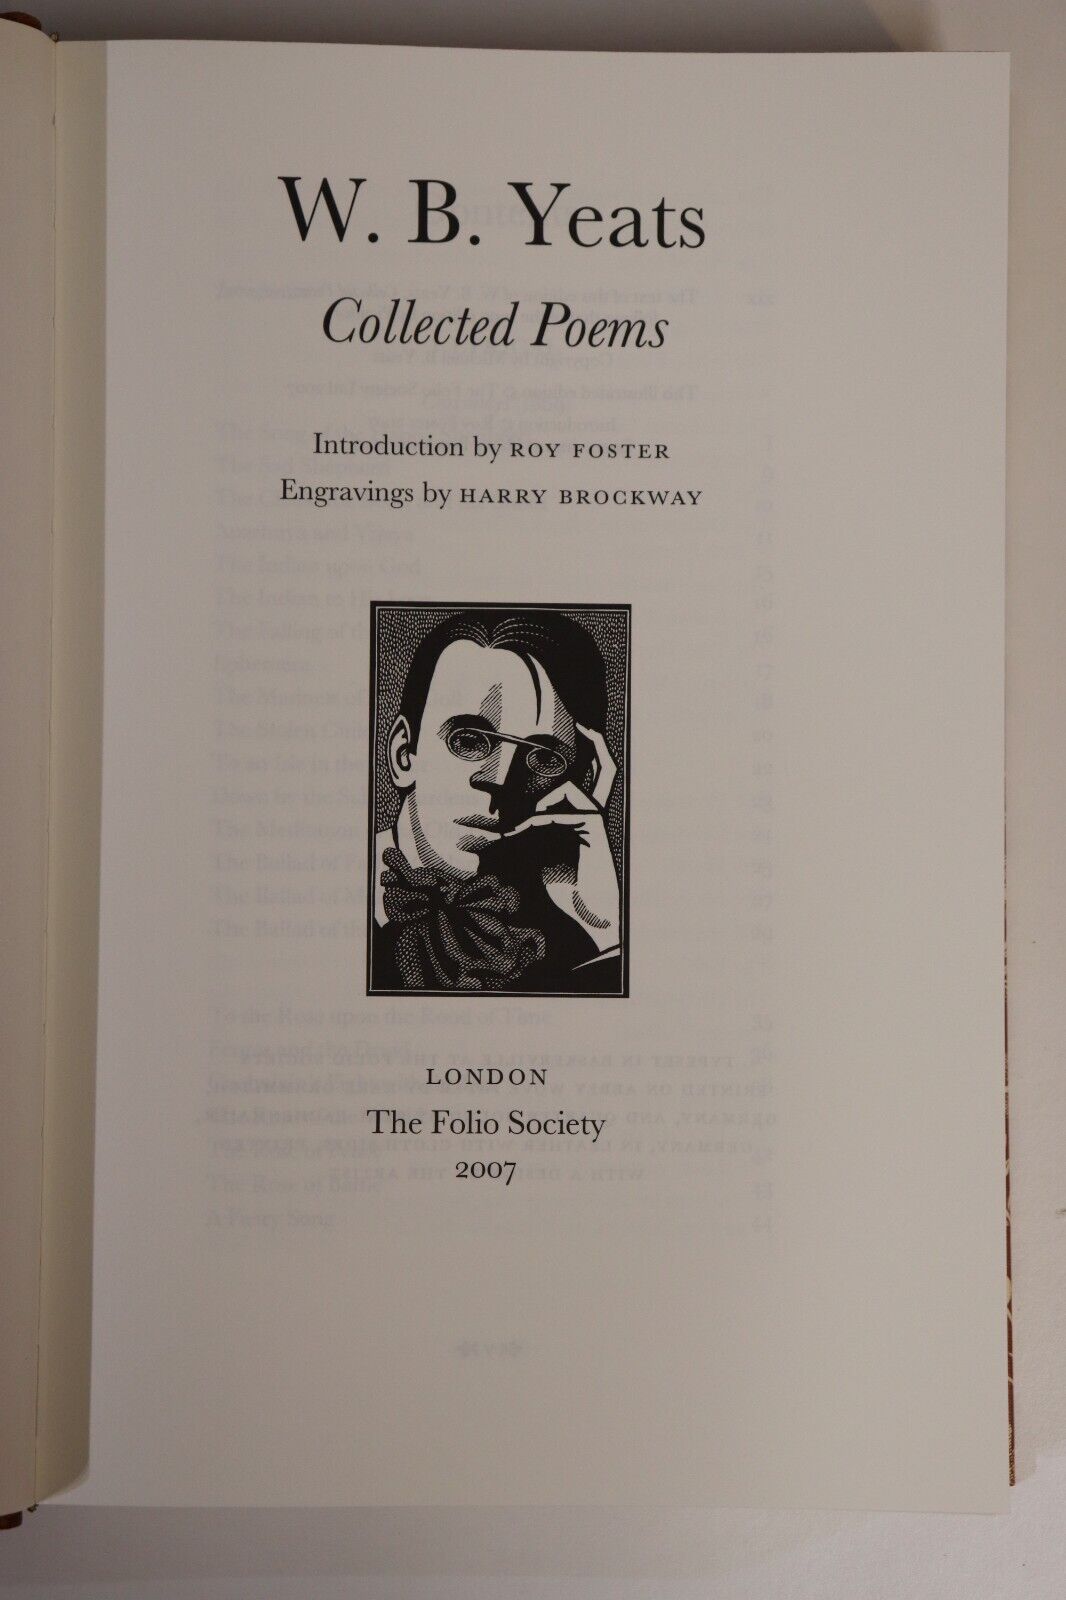 W.B. Yeats: Collected Poems - 2007 - Folio Society - Poetry Book - 0